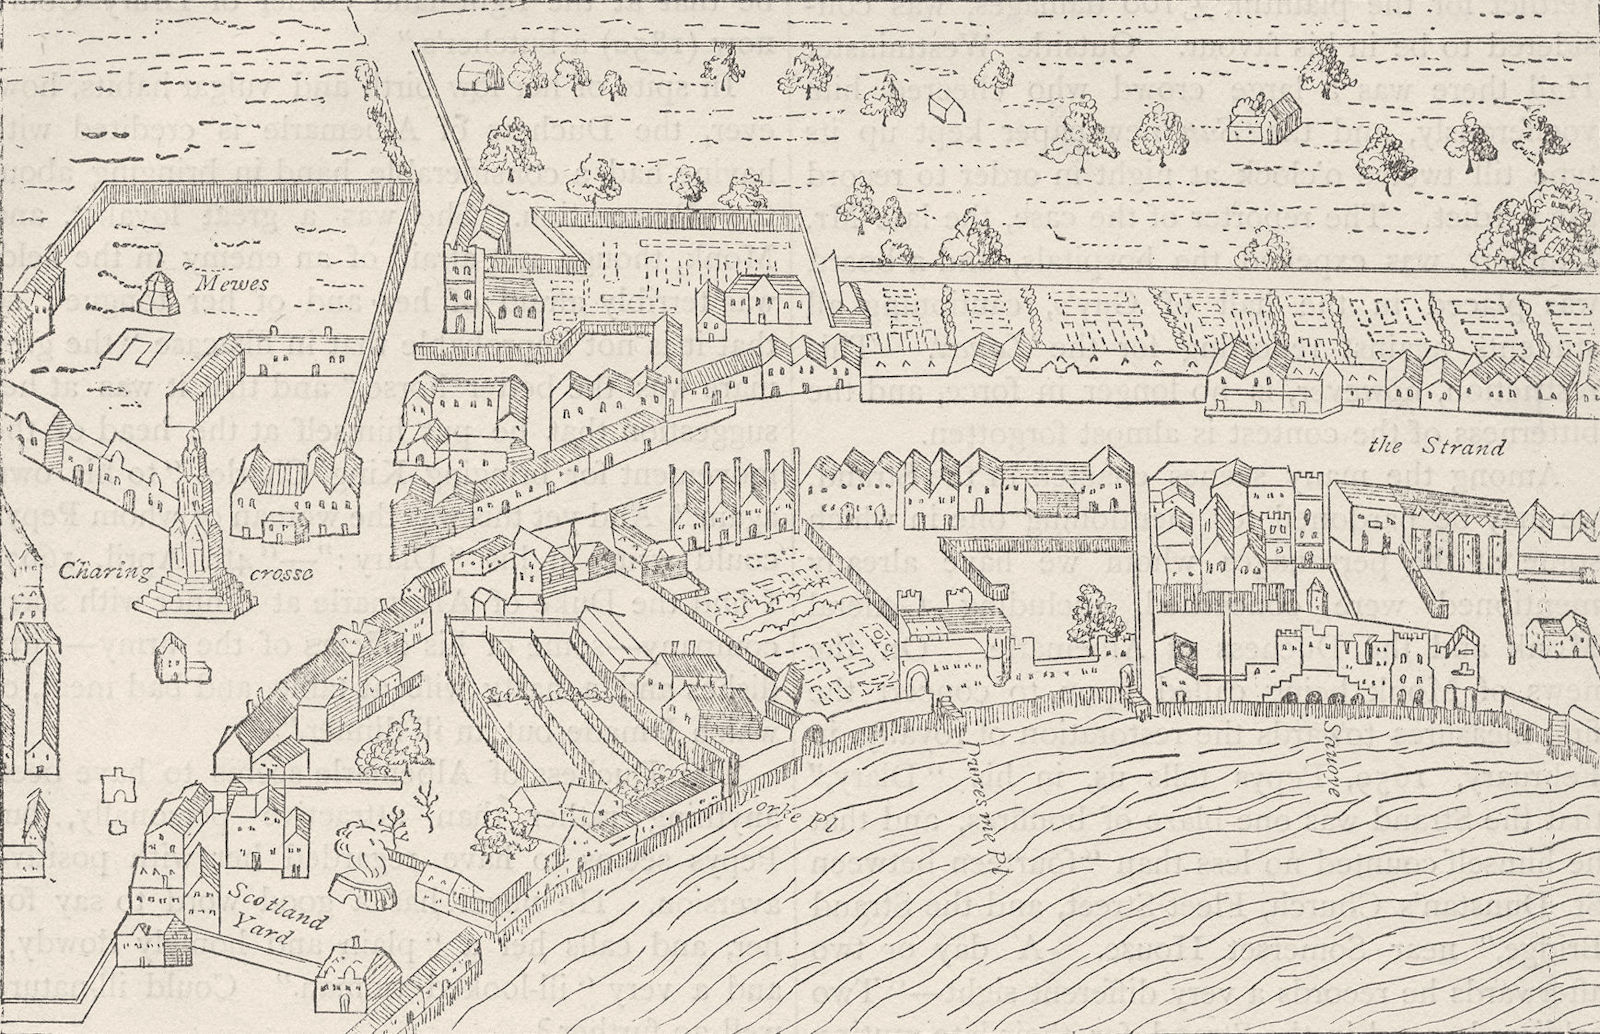 THE STRAND. View in 1560 (from th map of Ralph Aggas). London c1880 old